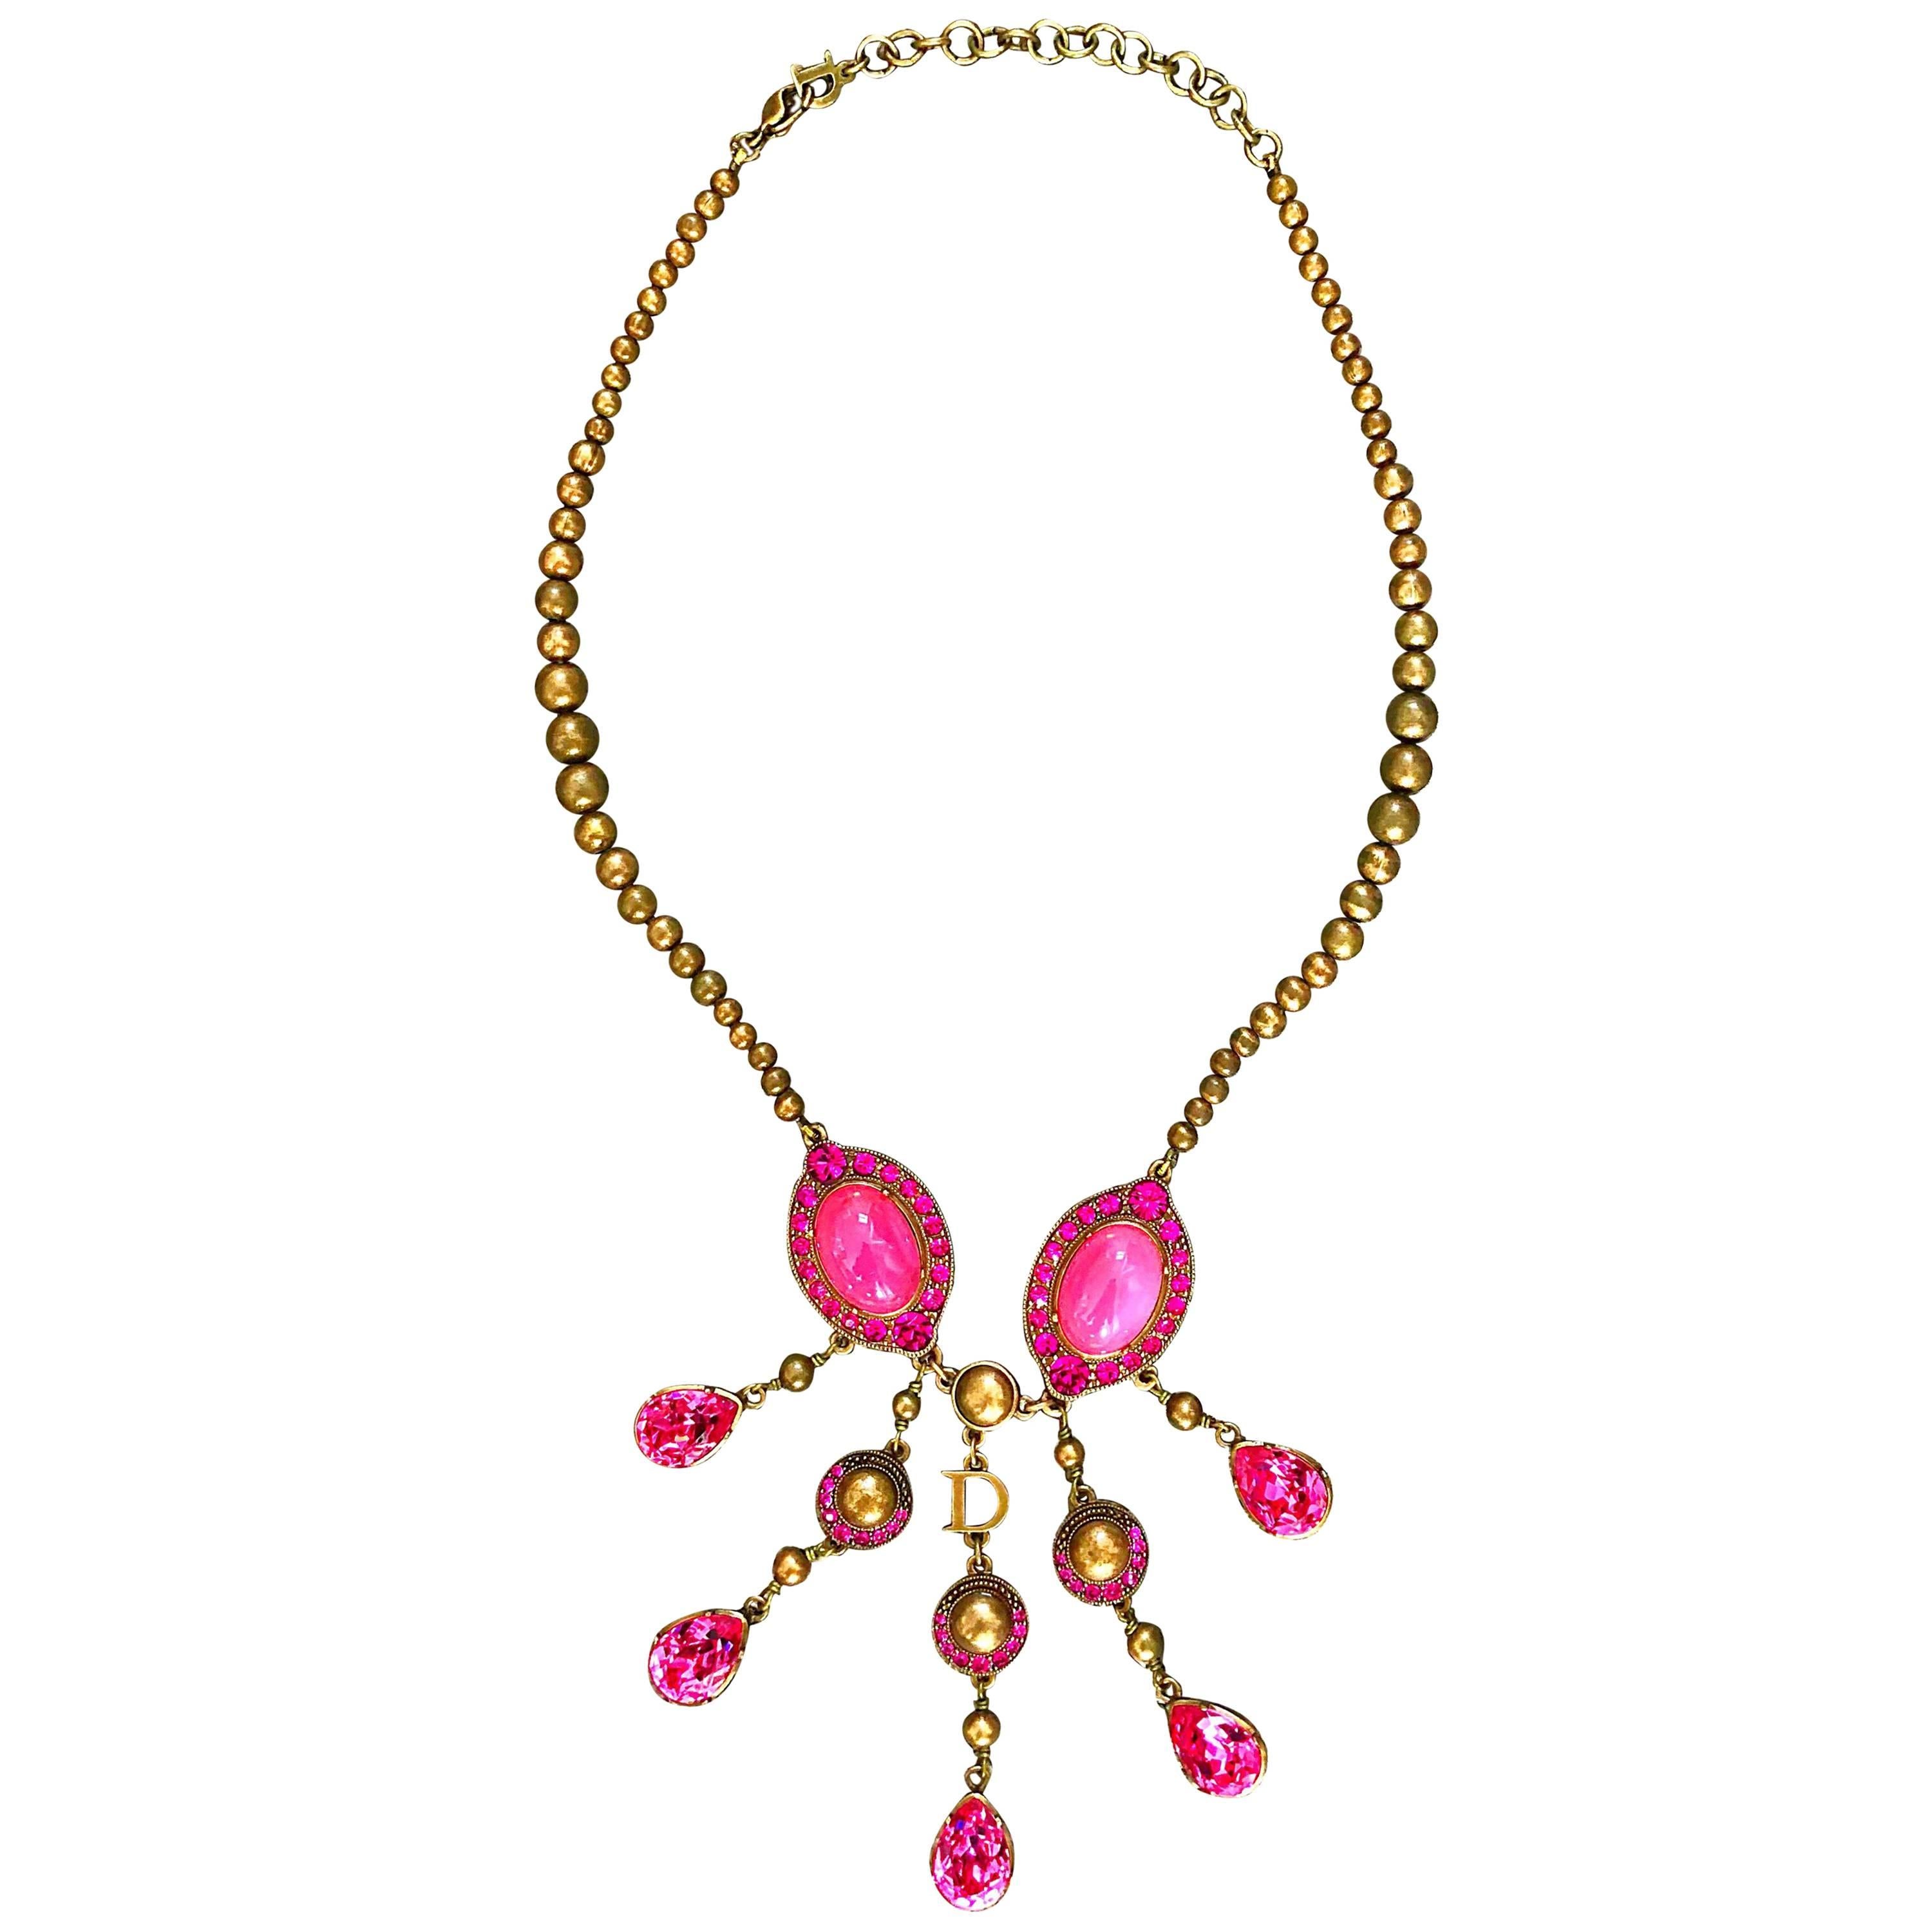 Christian Dior by John Galliano Pink and Gold Brass Rhinestone Vintage Necklace